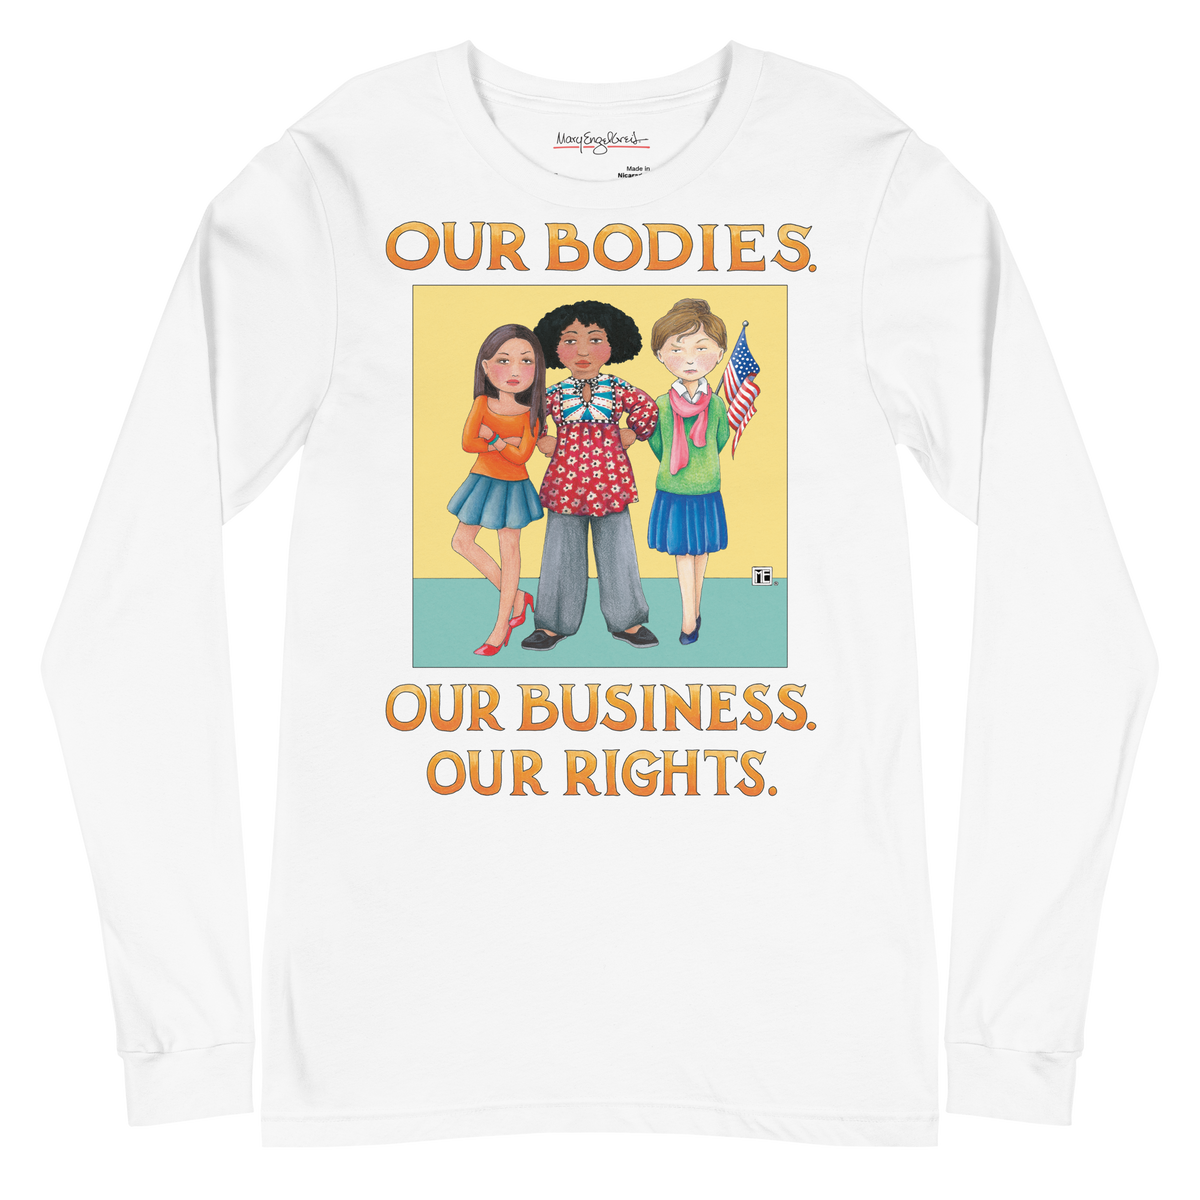 Our Rights Long Sleeve Shirt